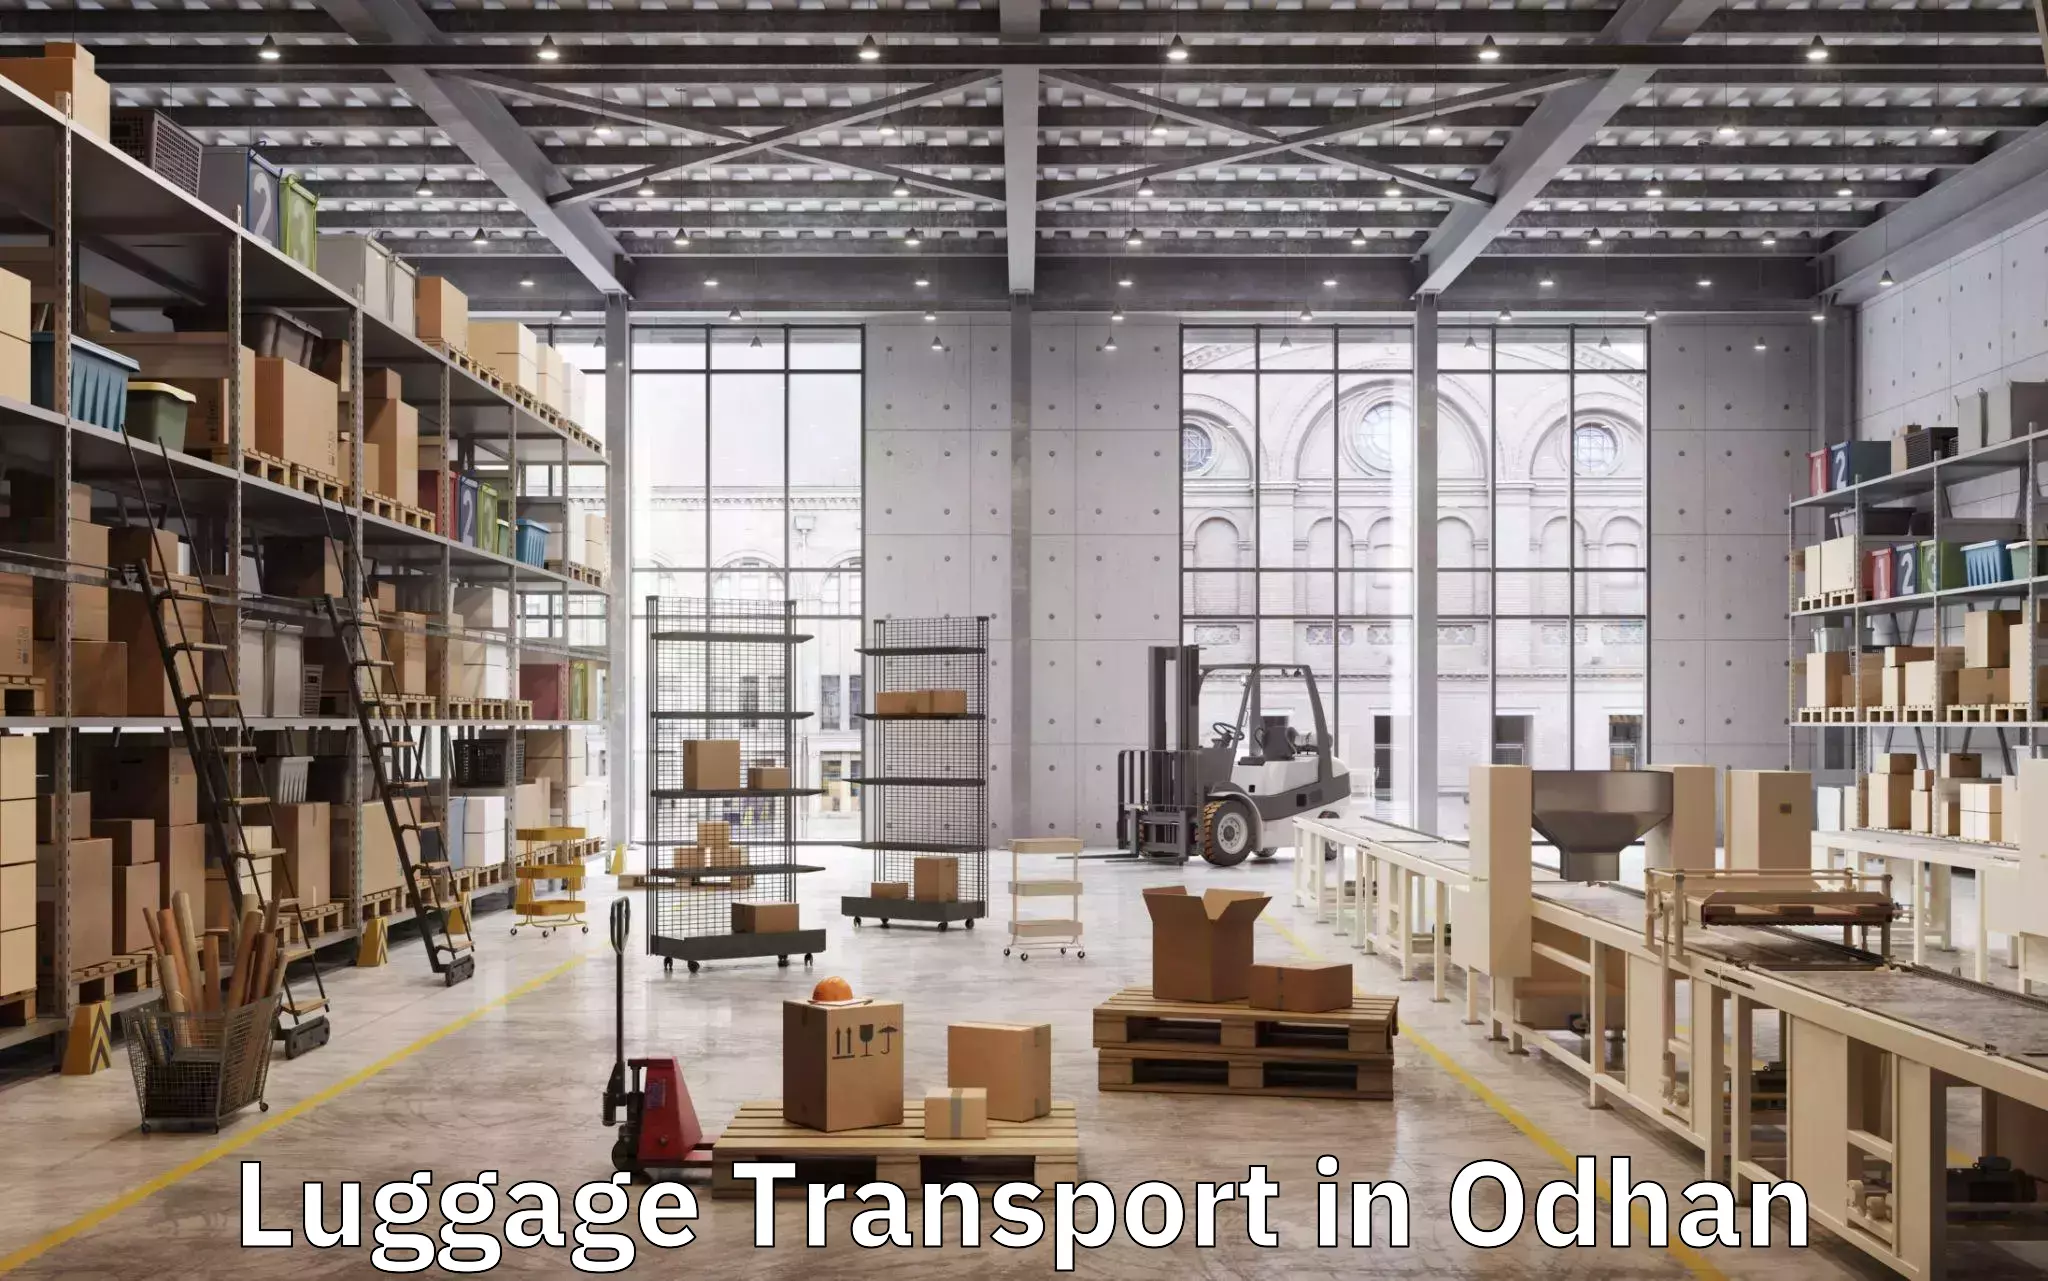 Luggage transport company in Odhan